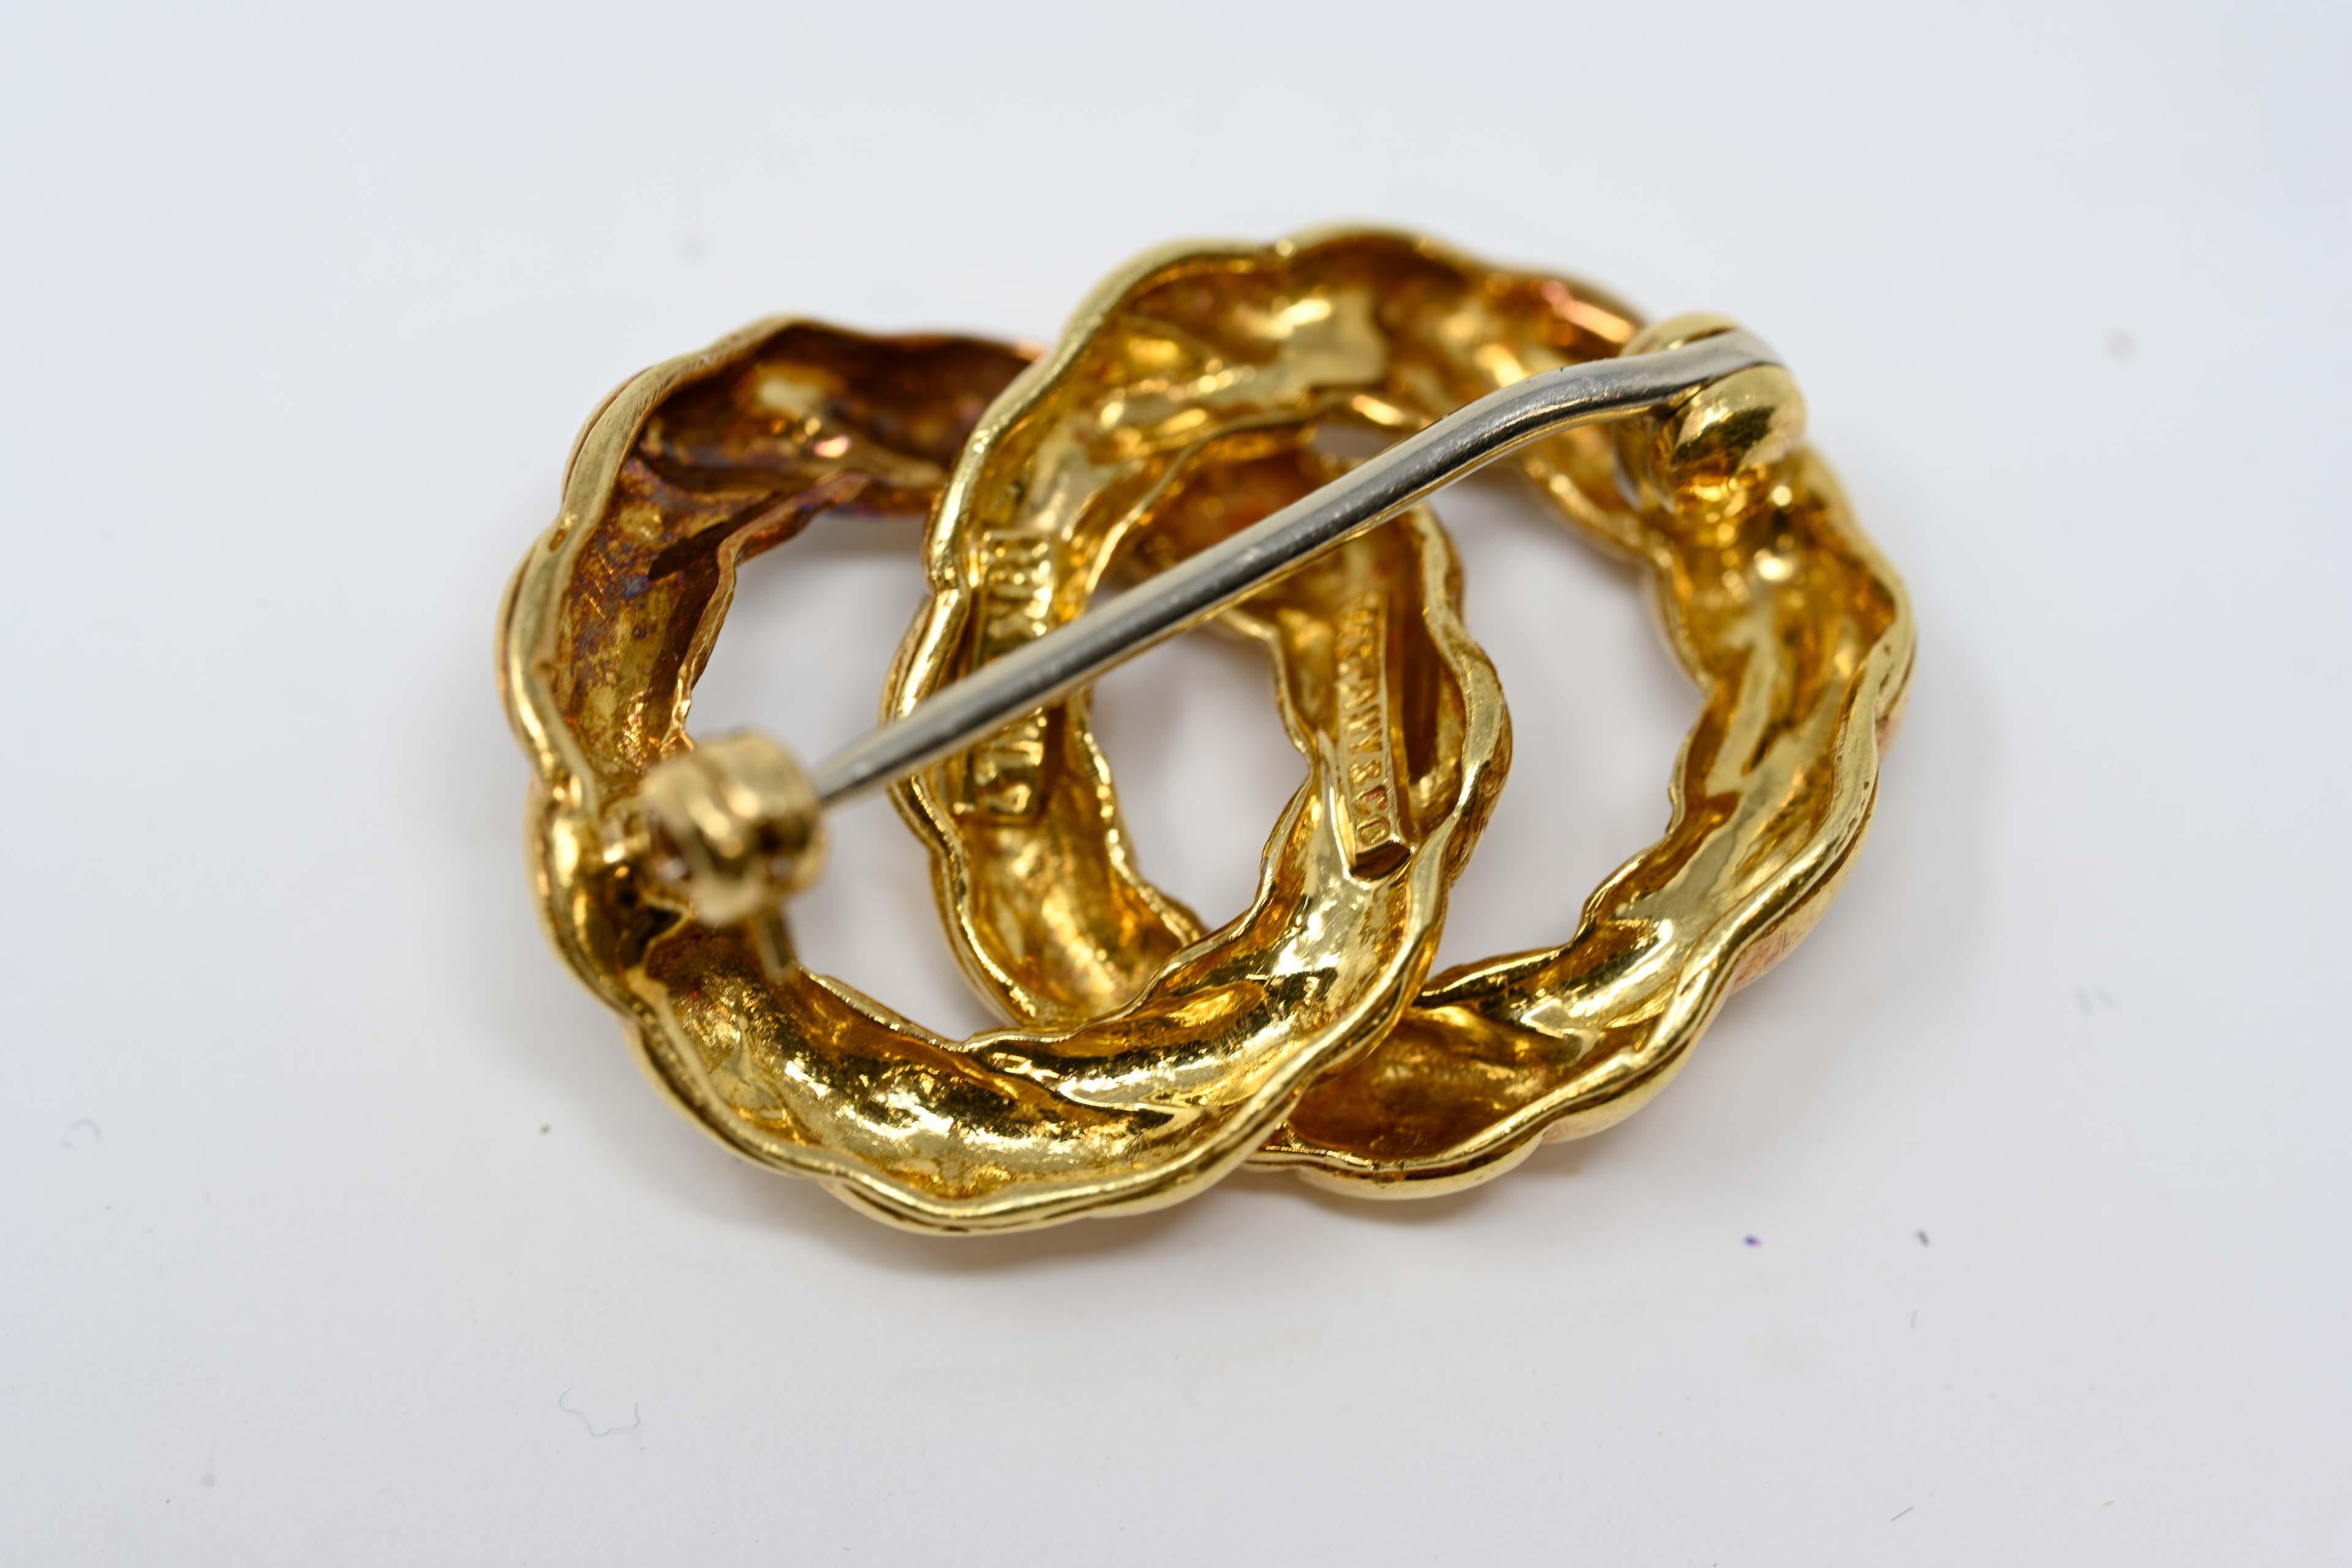 Tiffany & Co. 18k yellow gold rope knot twist brooch. Signed on the back, measures 18.5 mm tall x 26mm long. Preowned, in good condition, made in Italy during the late 20th century. Weighs 6.7 grams. 